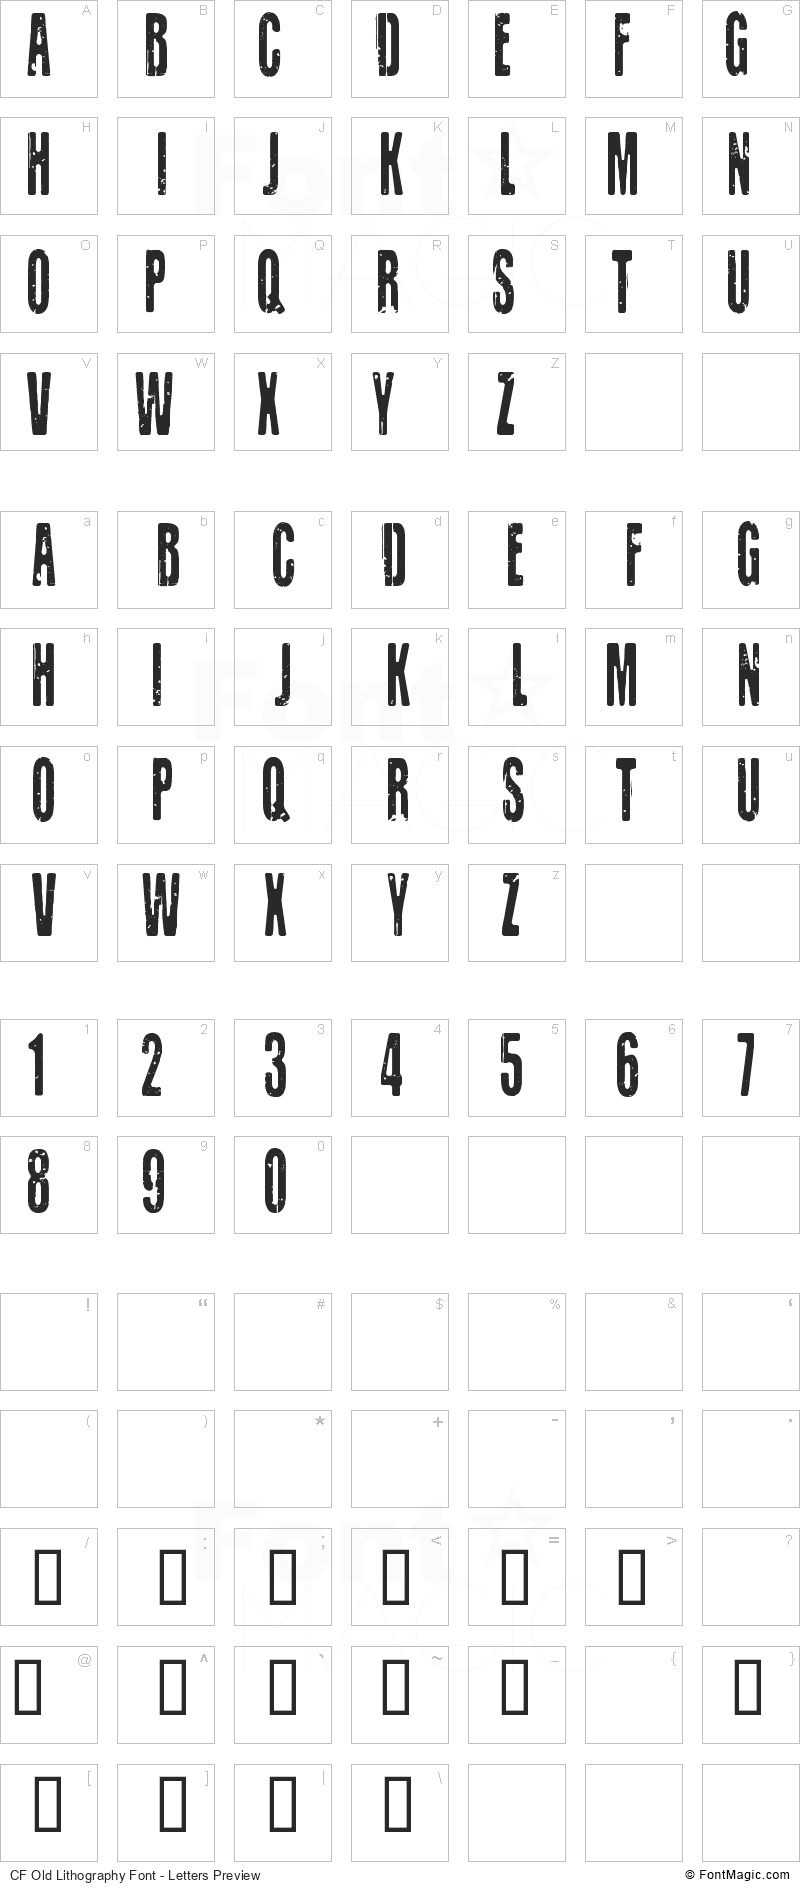 CF Old Lithography Font - All Latters Preview Chart